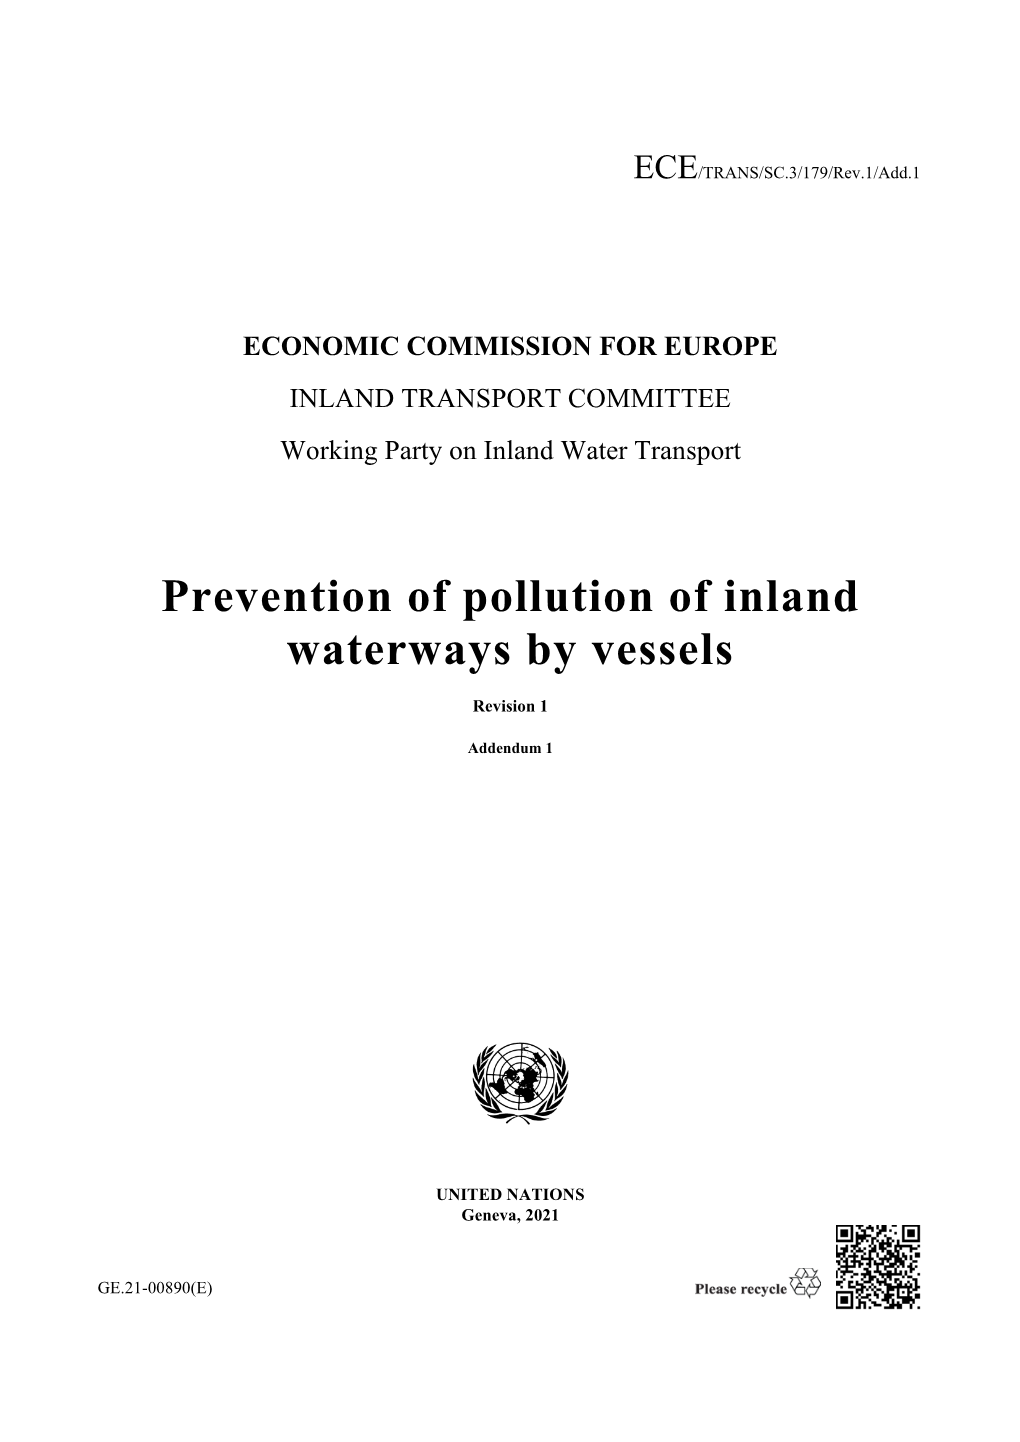 Prevention of Pollution of Inland Waterways by Vessels